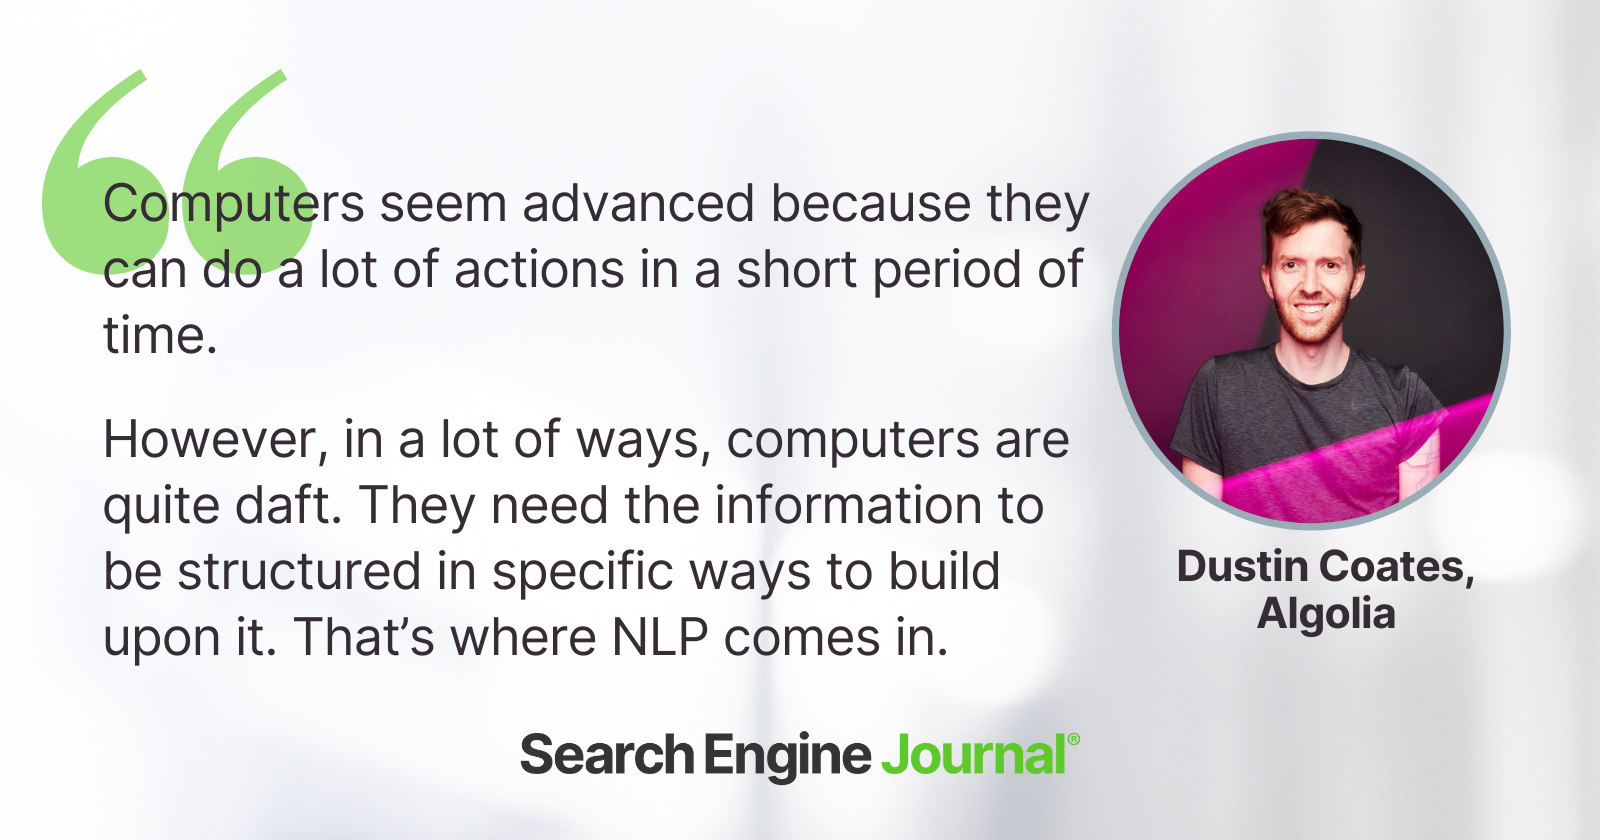 Why NLP matters in search